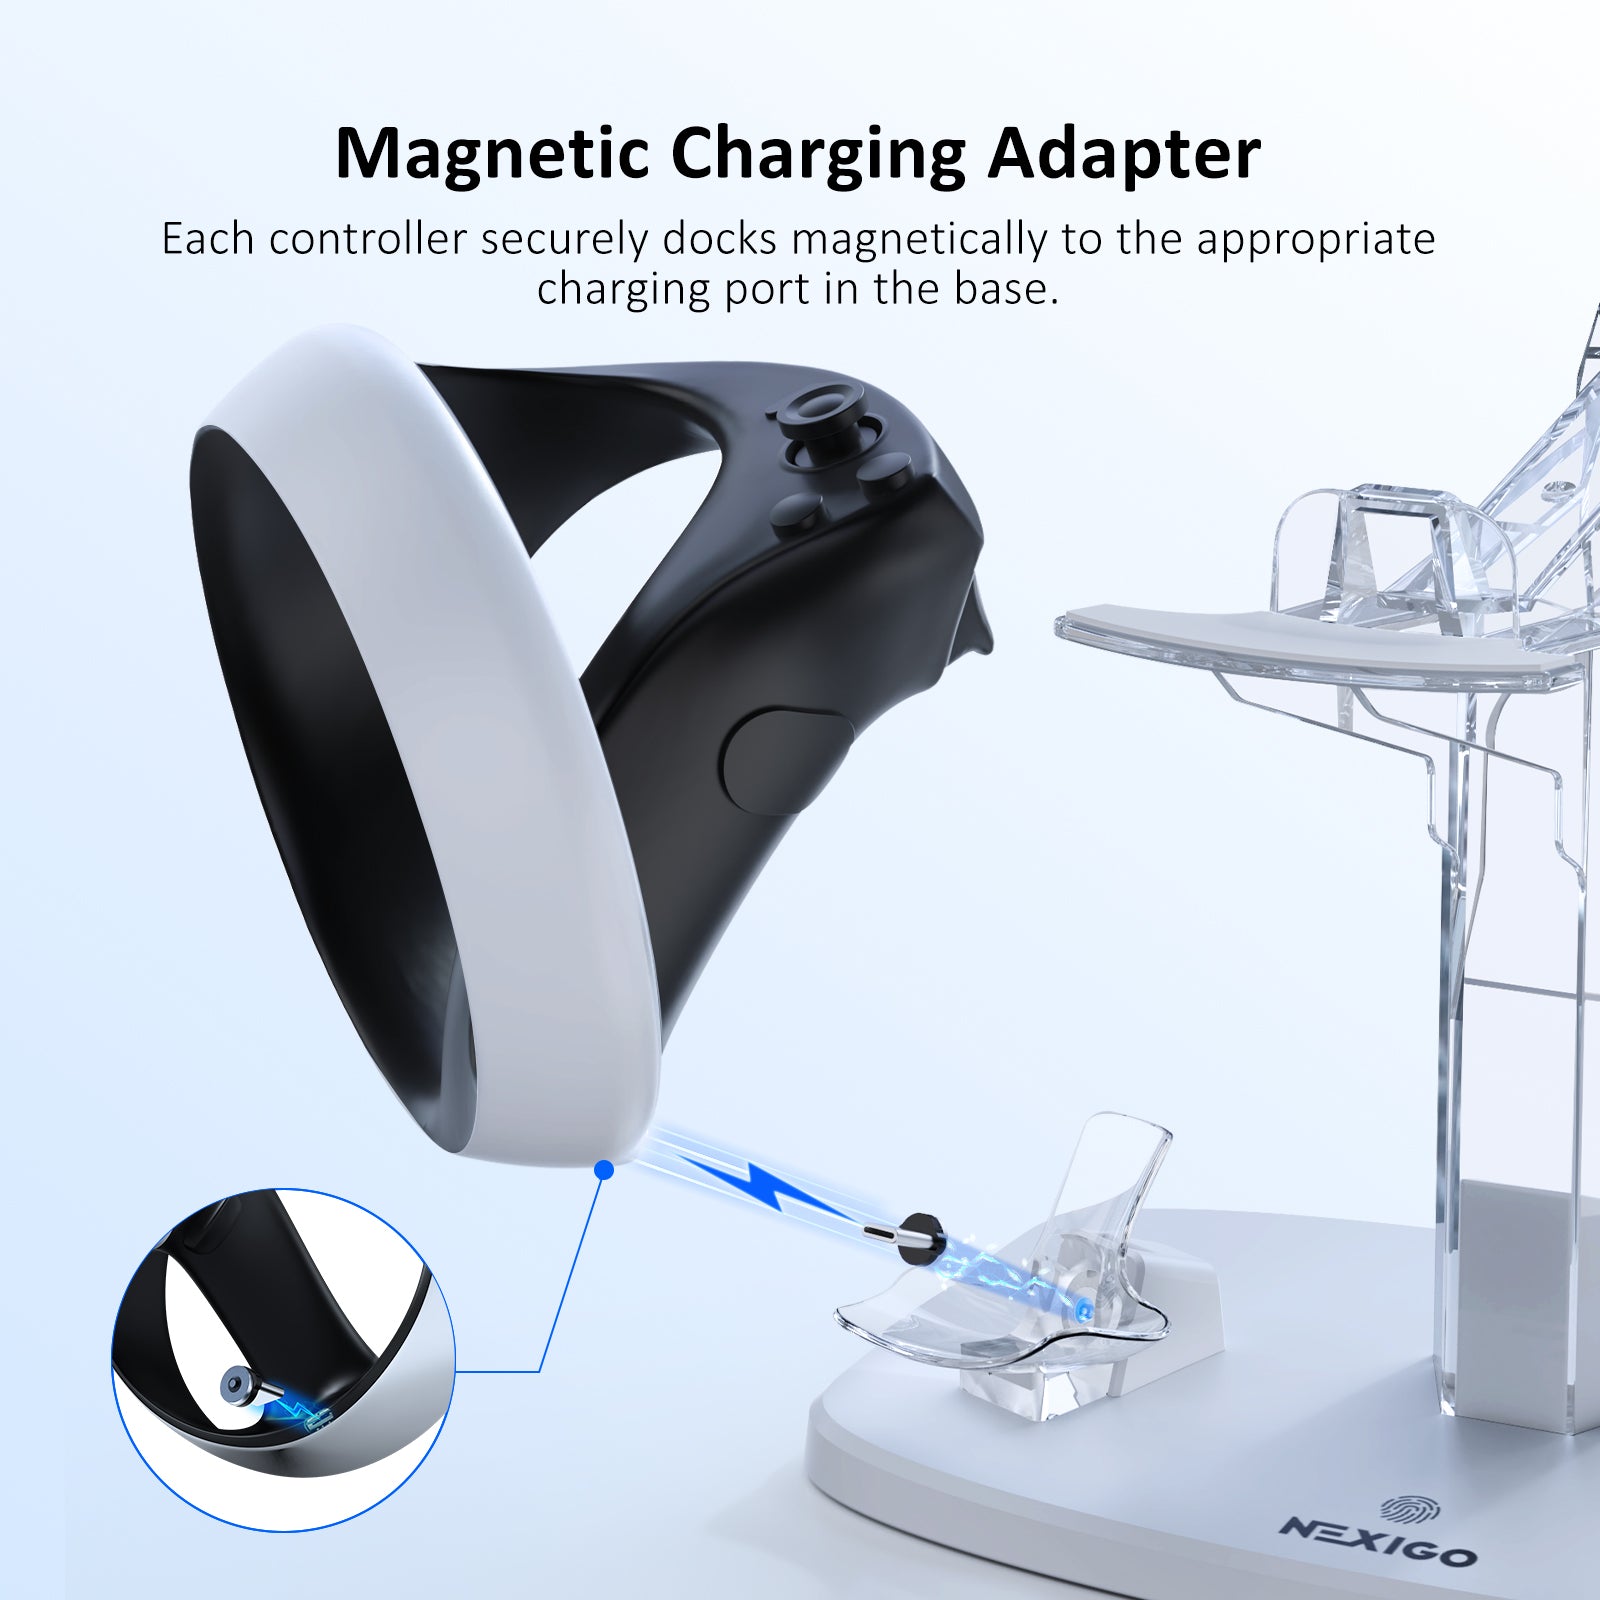 Install Magnetic Charging Adapter for controller charging.